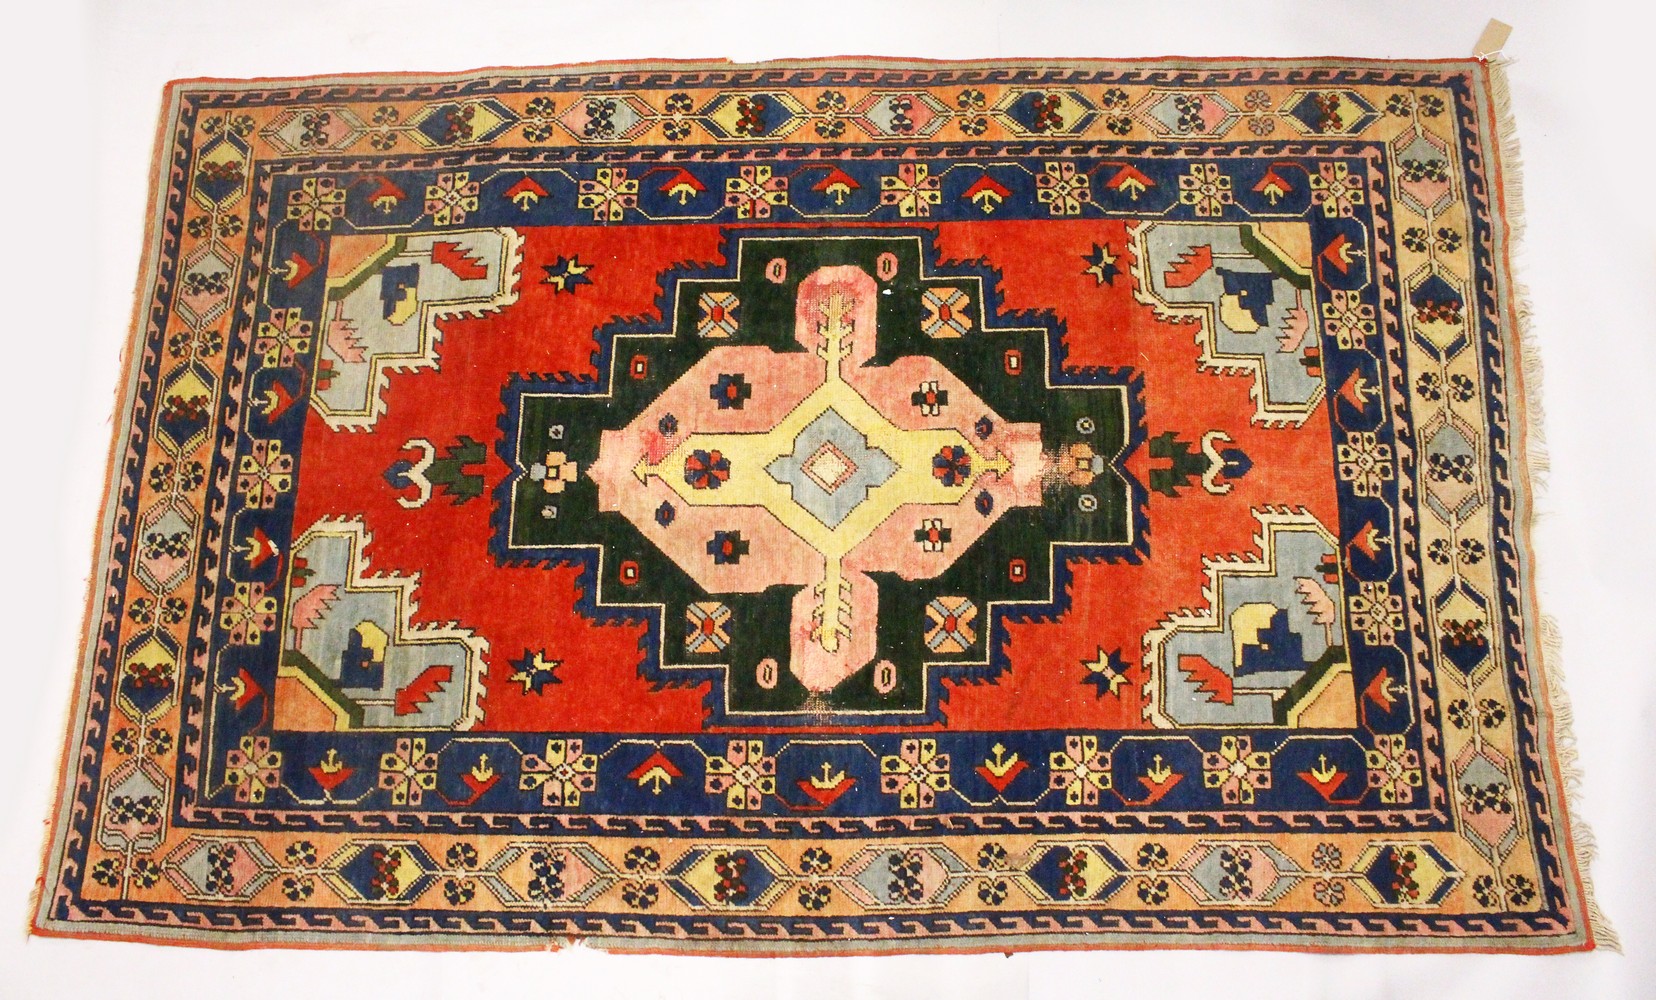 A PERSIAN RUG, 20TH CENTURY, bright red ground with large stylised design, within a similar double